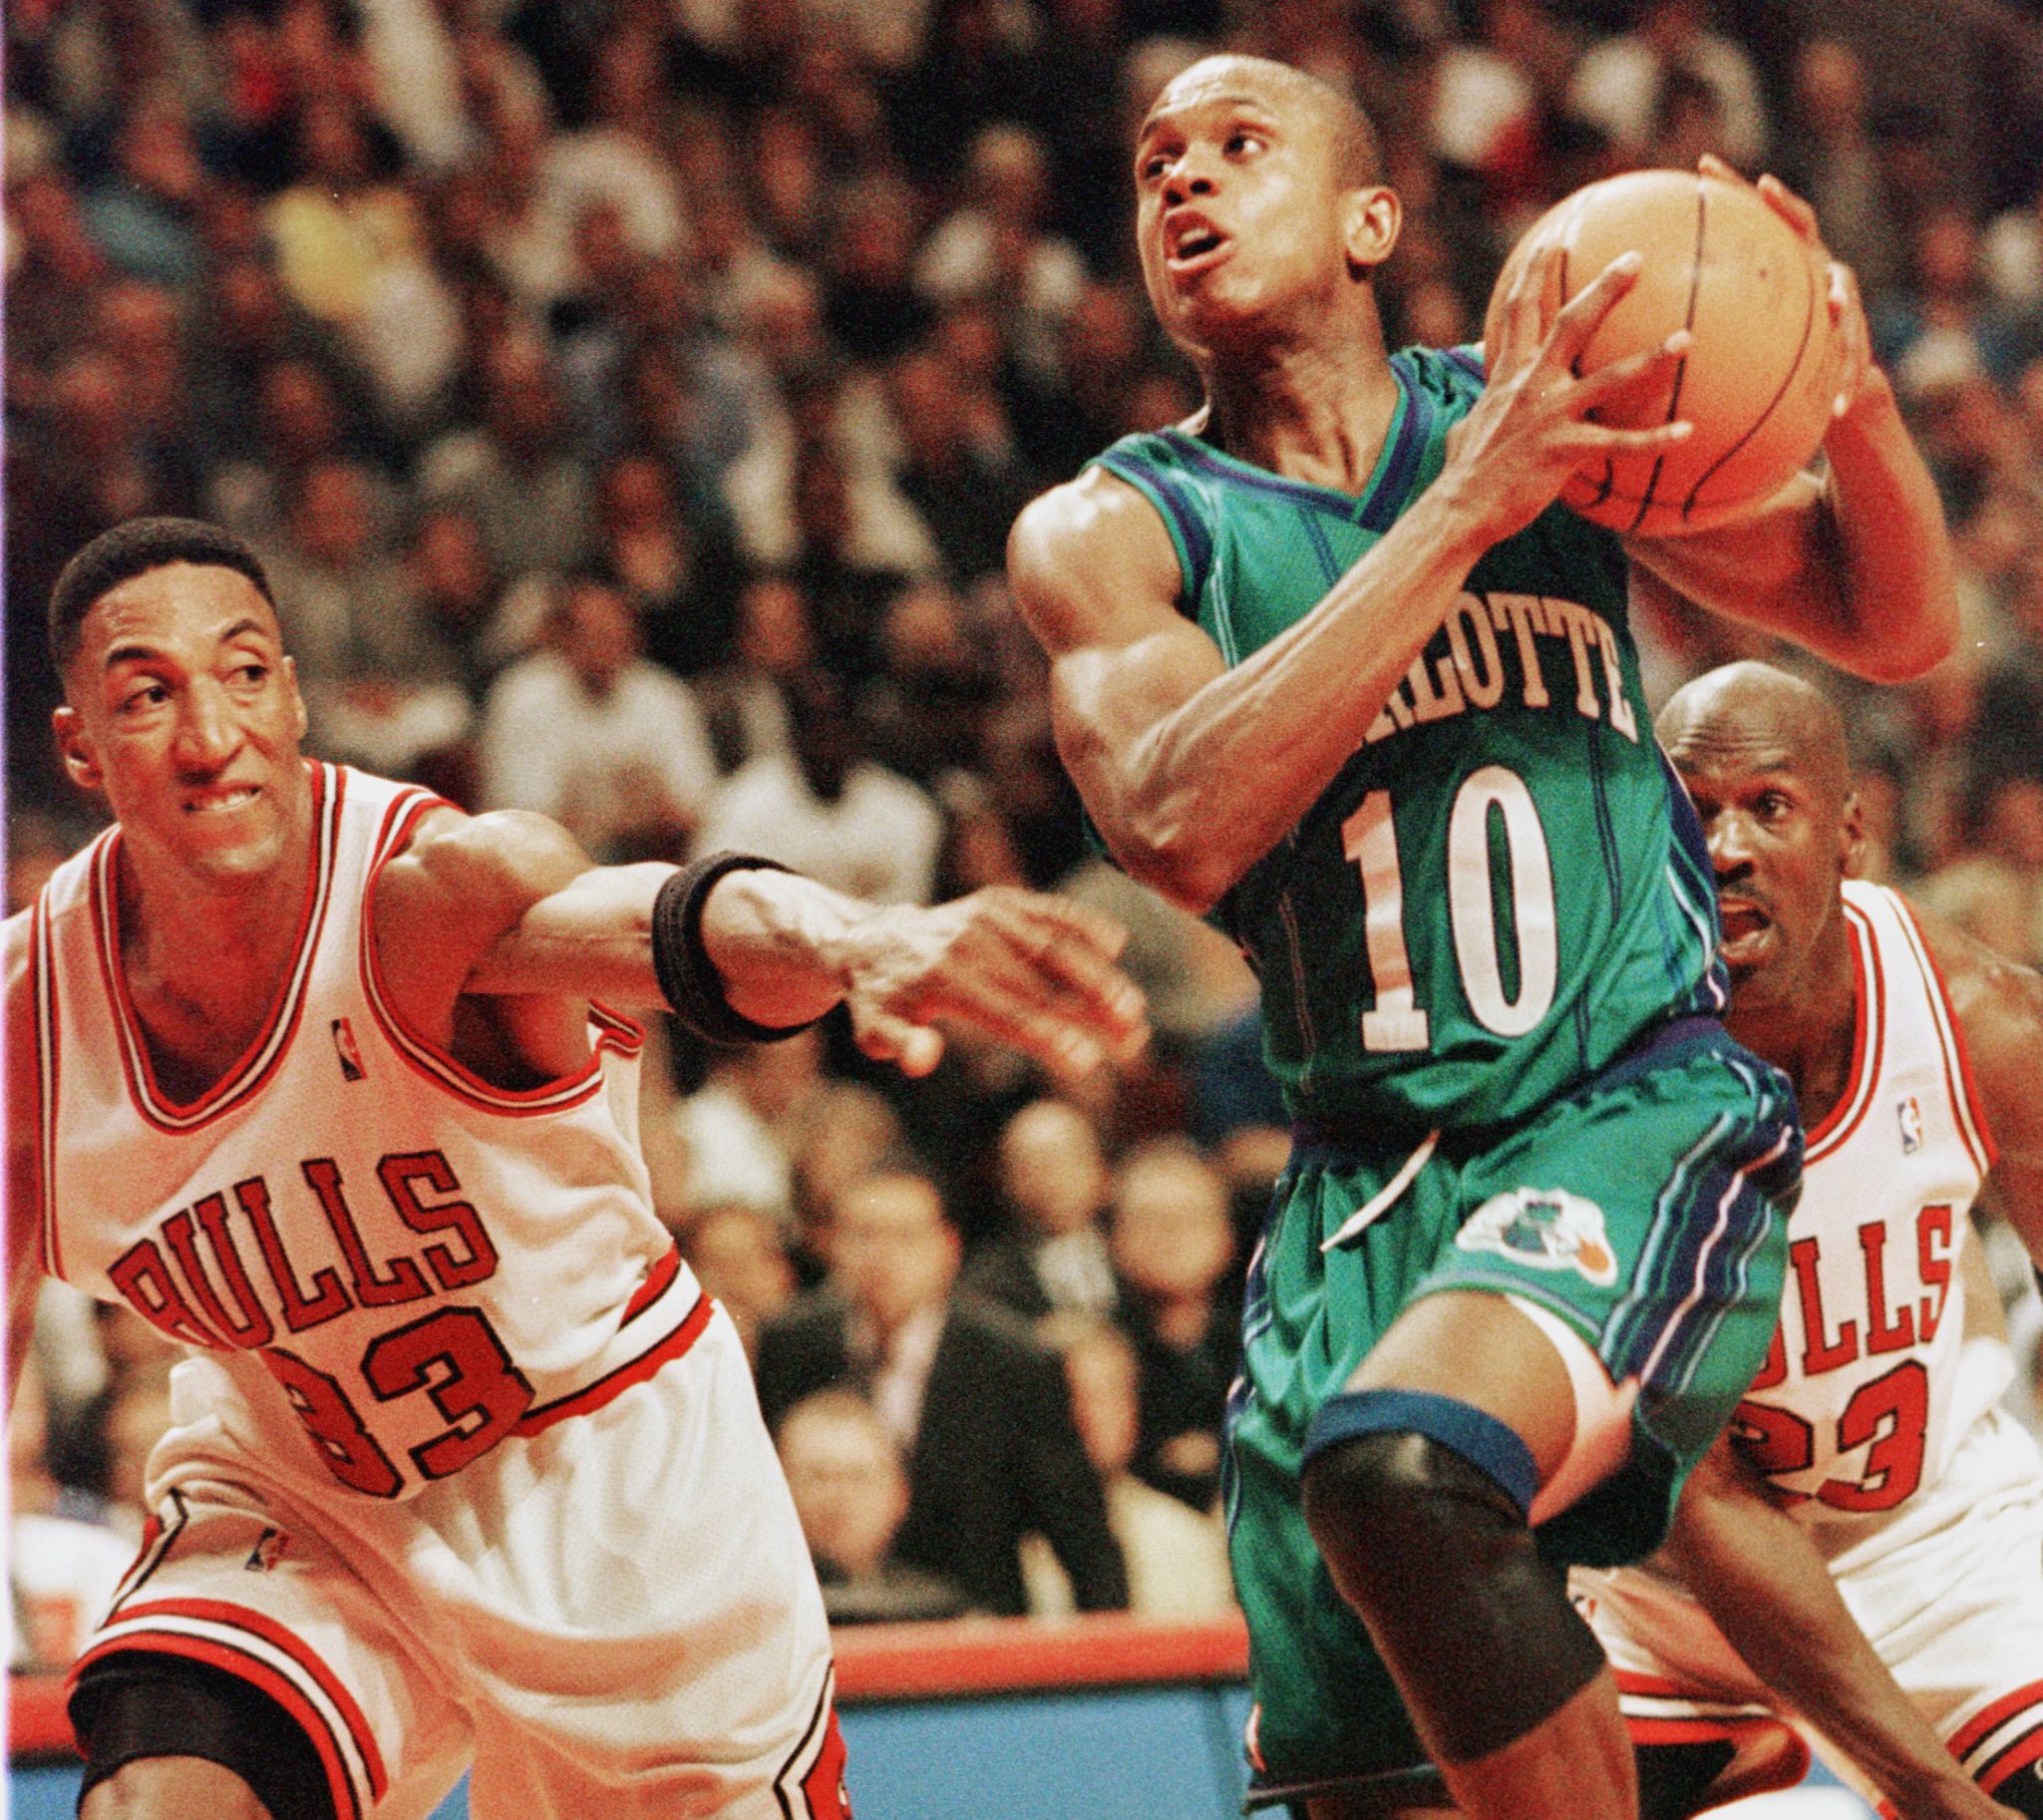 File: Scottie Pippen (L) and Michael Jordan(R) of the Chicago Bulls playing in an NBA Eastern Conference semifinals game at the United Center in Chicago in 1994